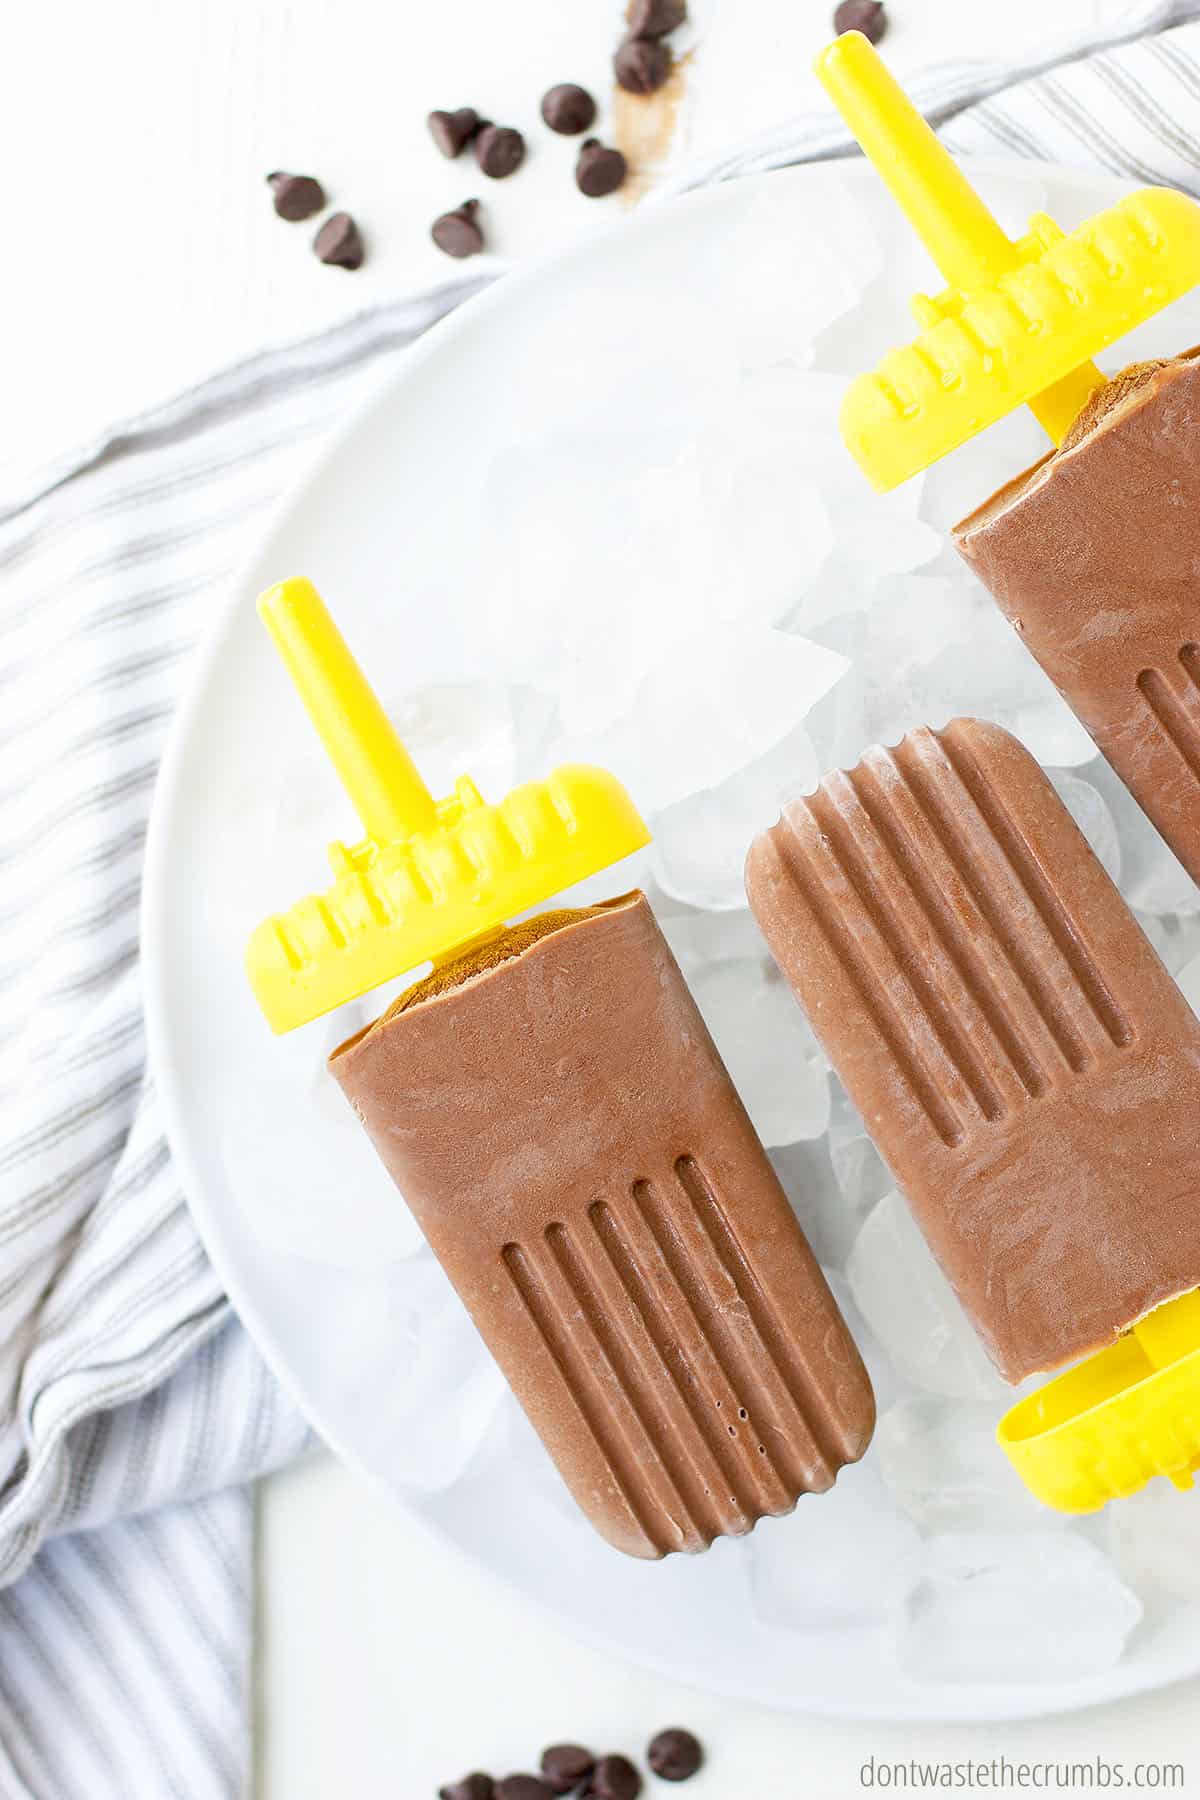 Homemade fudge pops lying in a bowl of ice, on top of a dish towel, with some chocolate chips scattered nearby